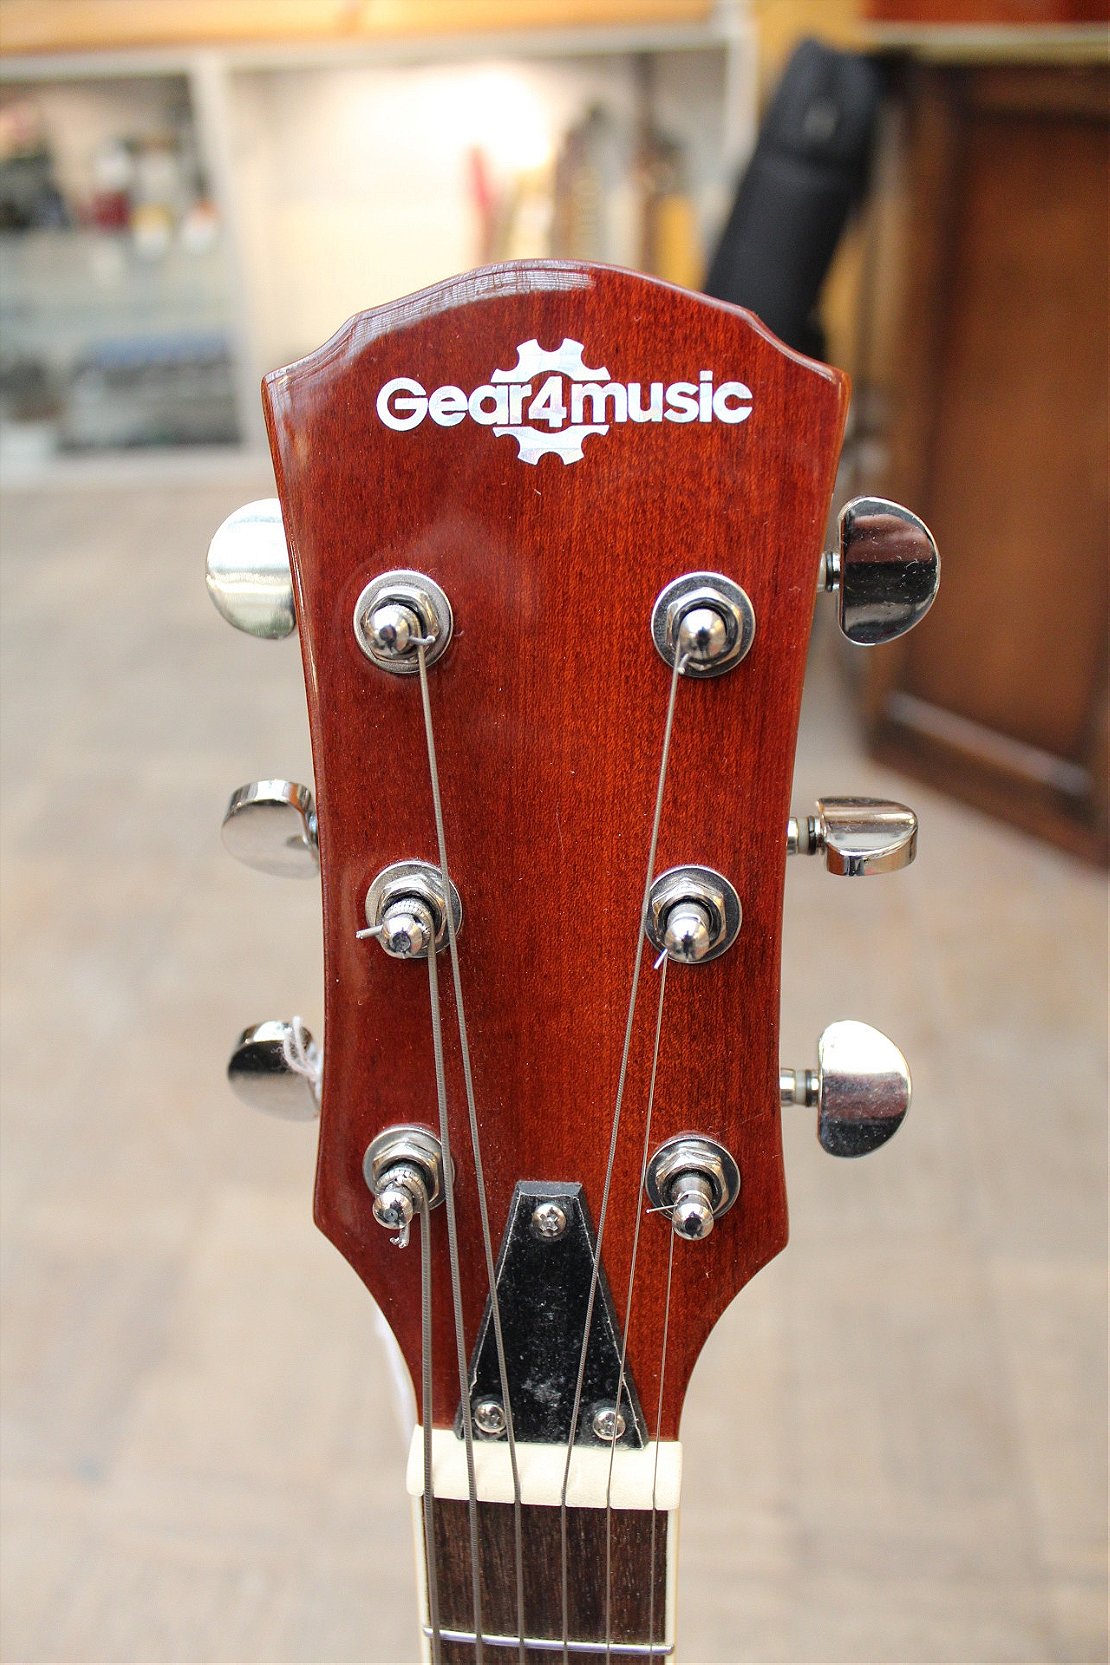 Guitar Foot Rest by Gear4music - Nearly New at Gear4music